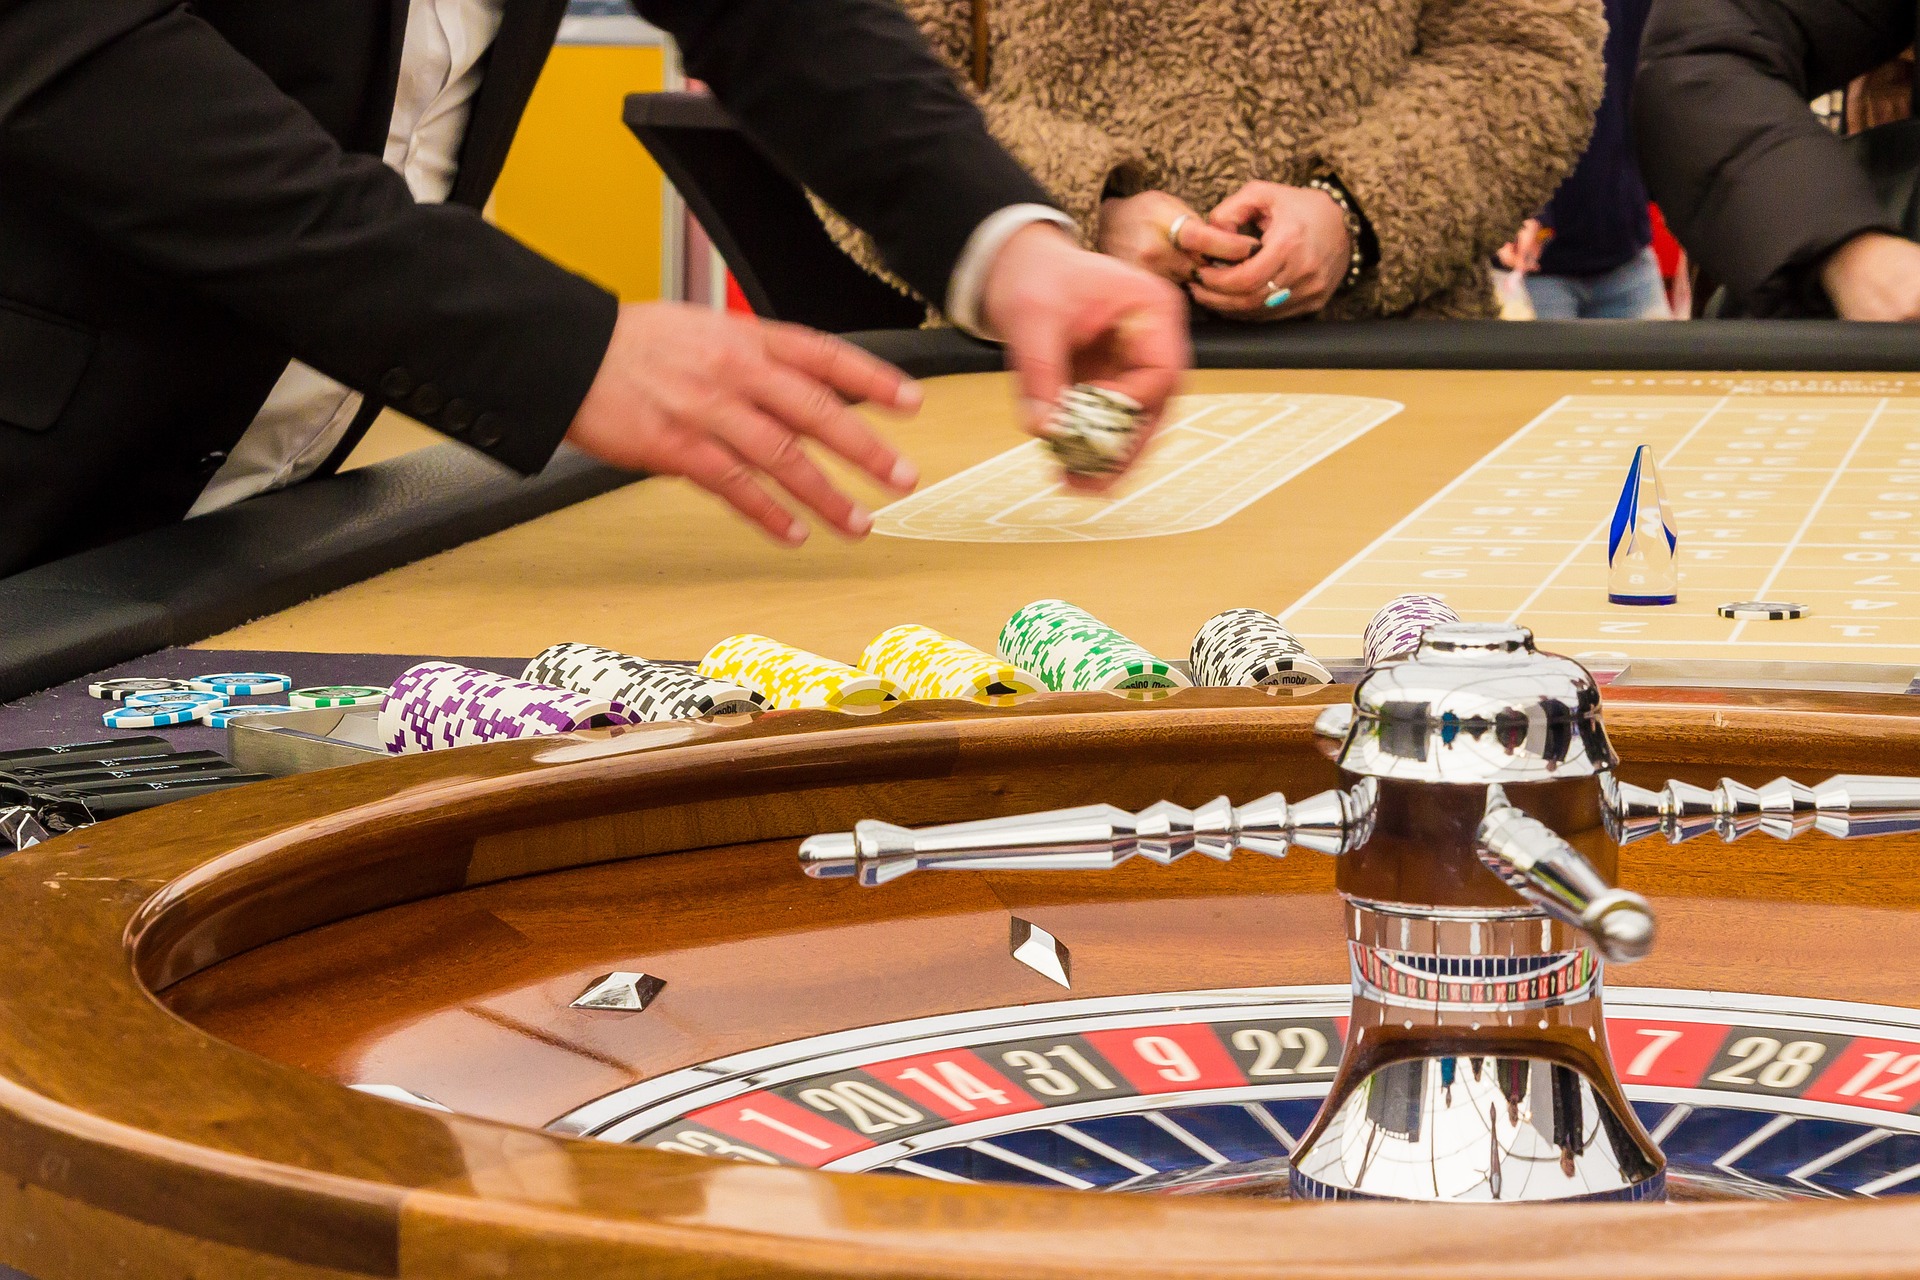 non uk online casino - Relax, It's Play Time!